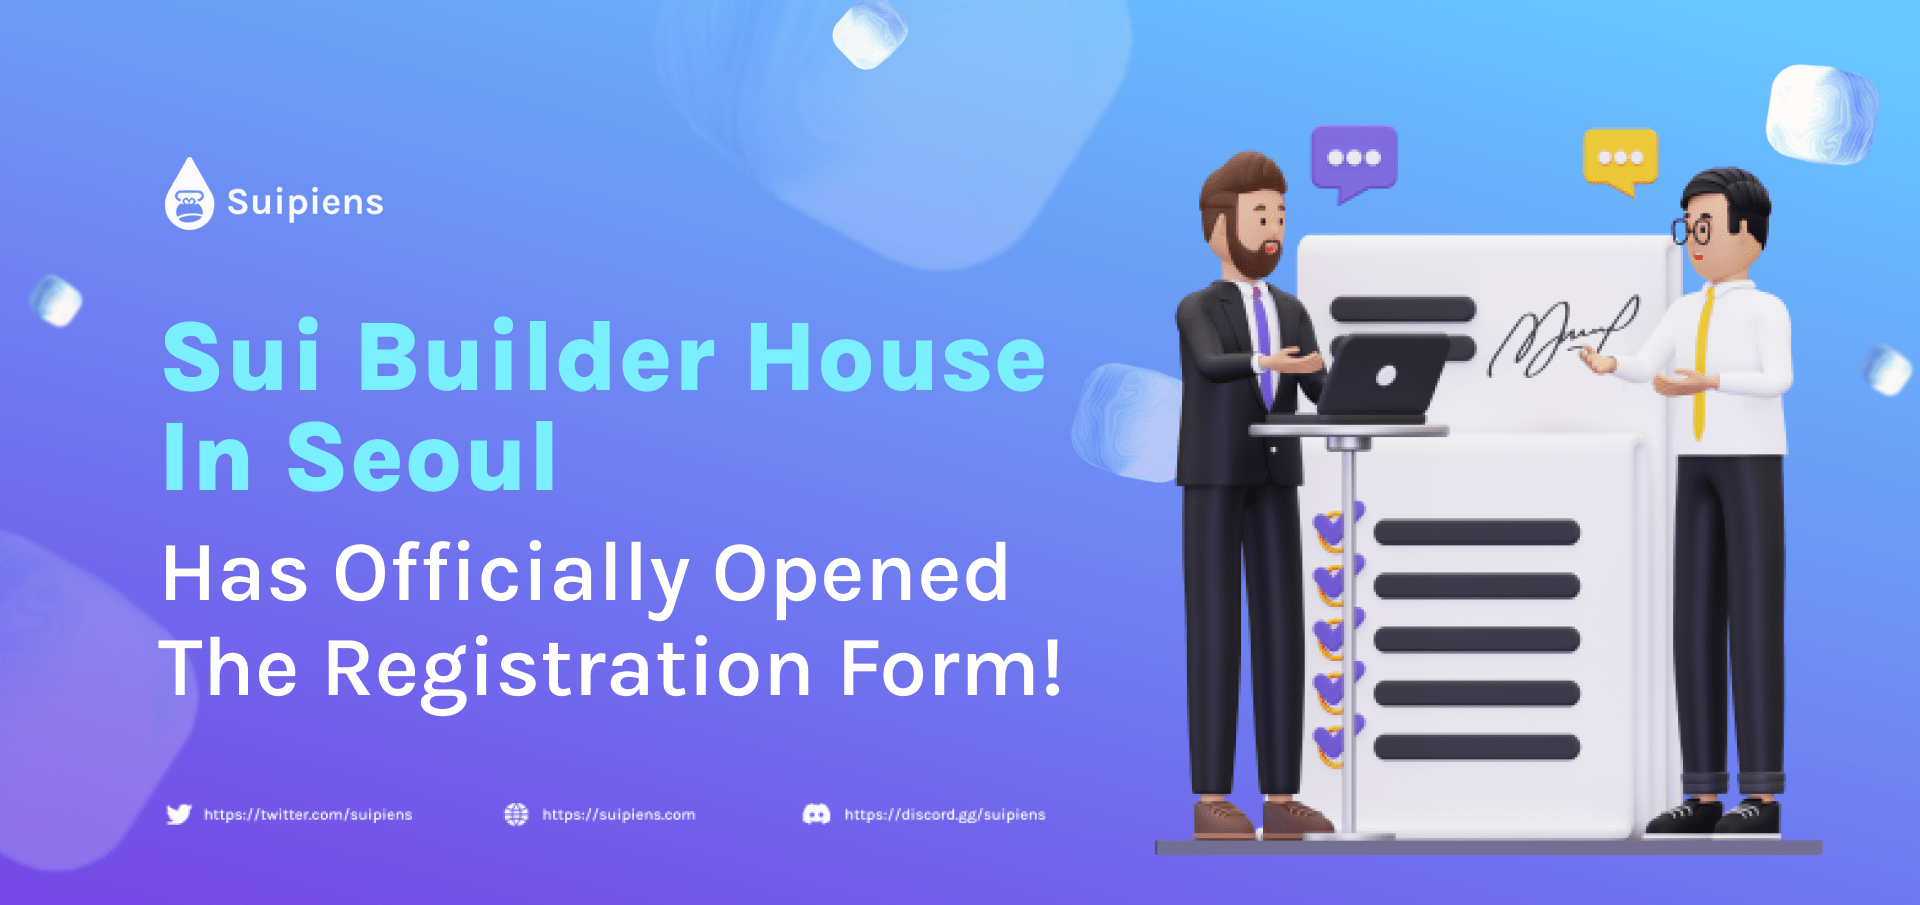 Sui Builder House In Seoul has officially opened the registration form!